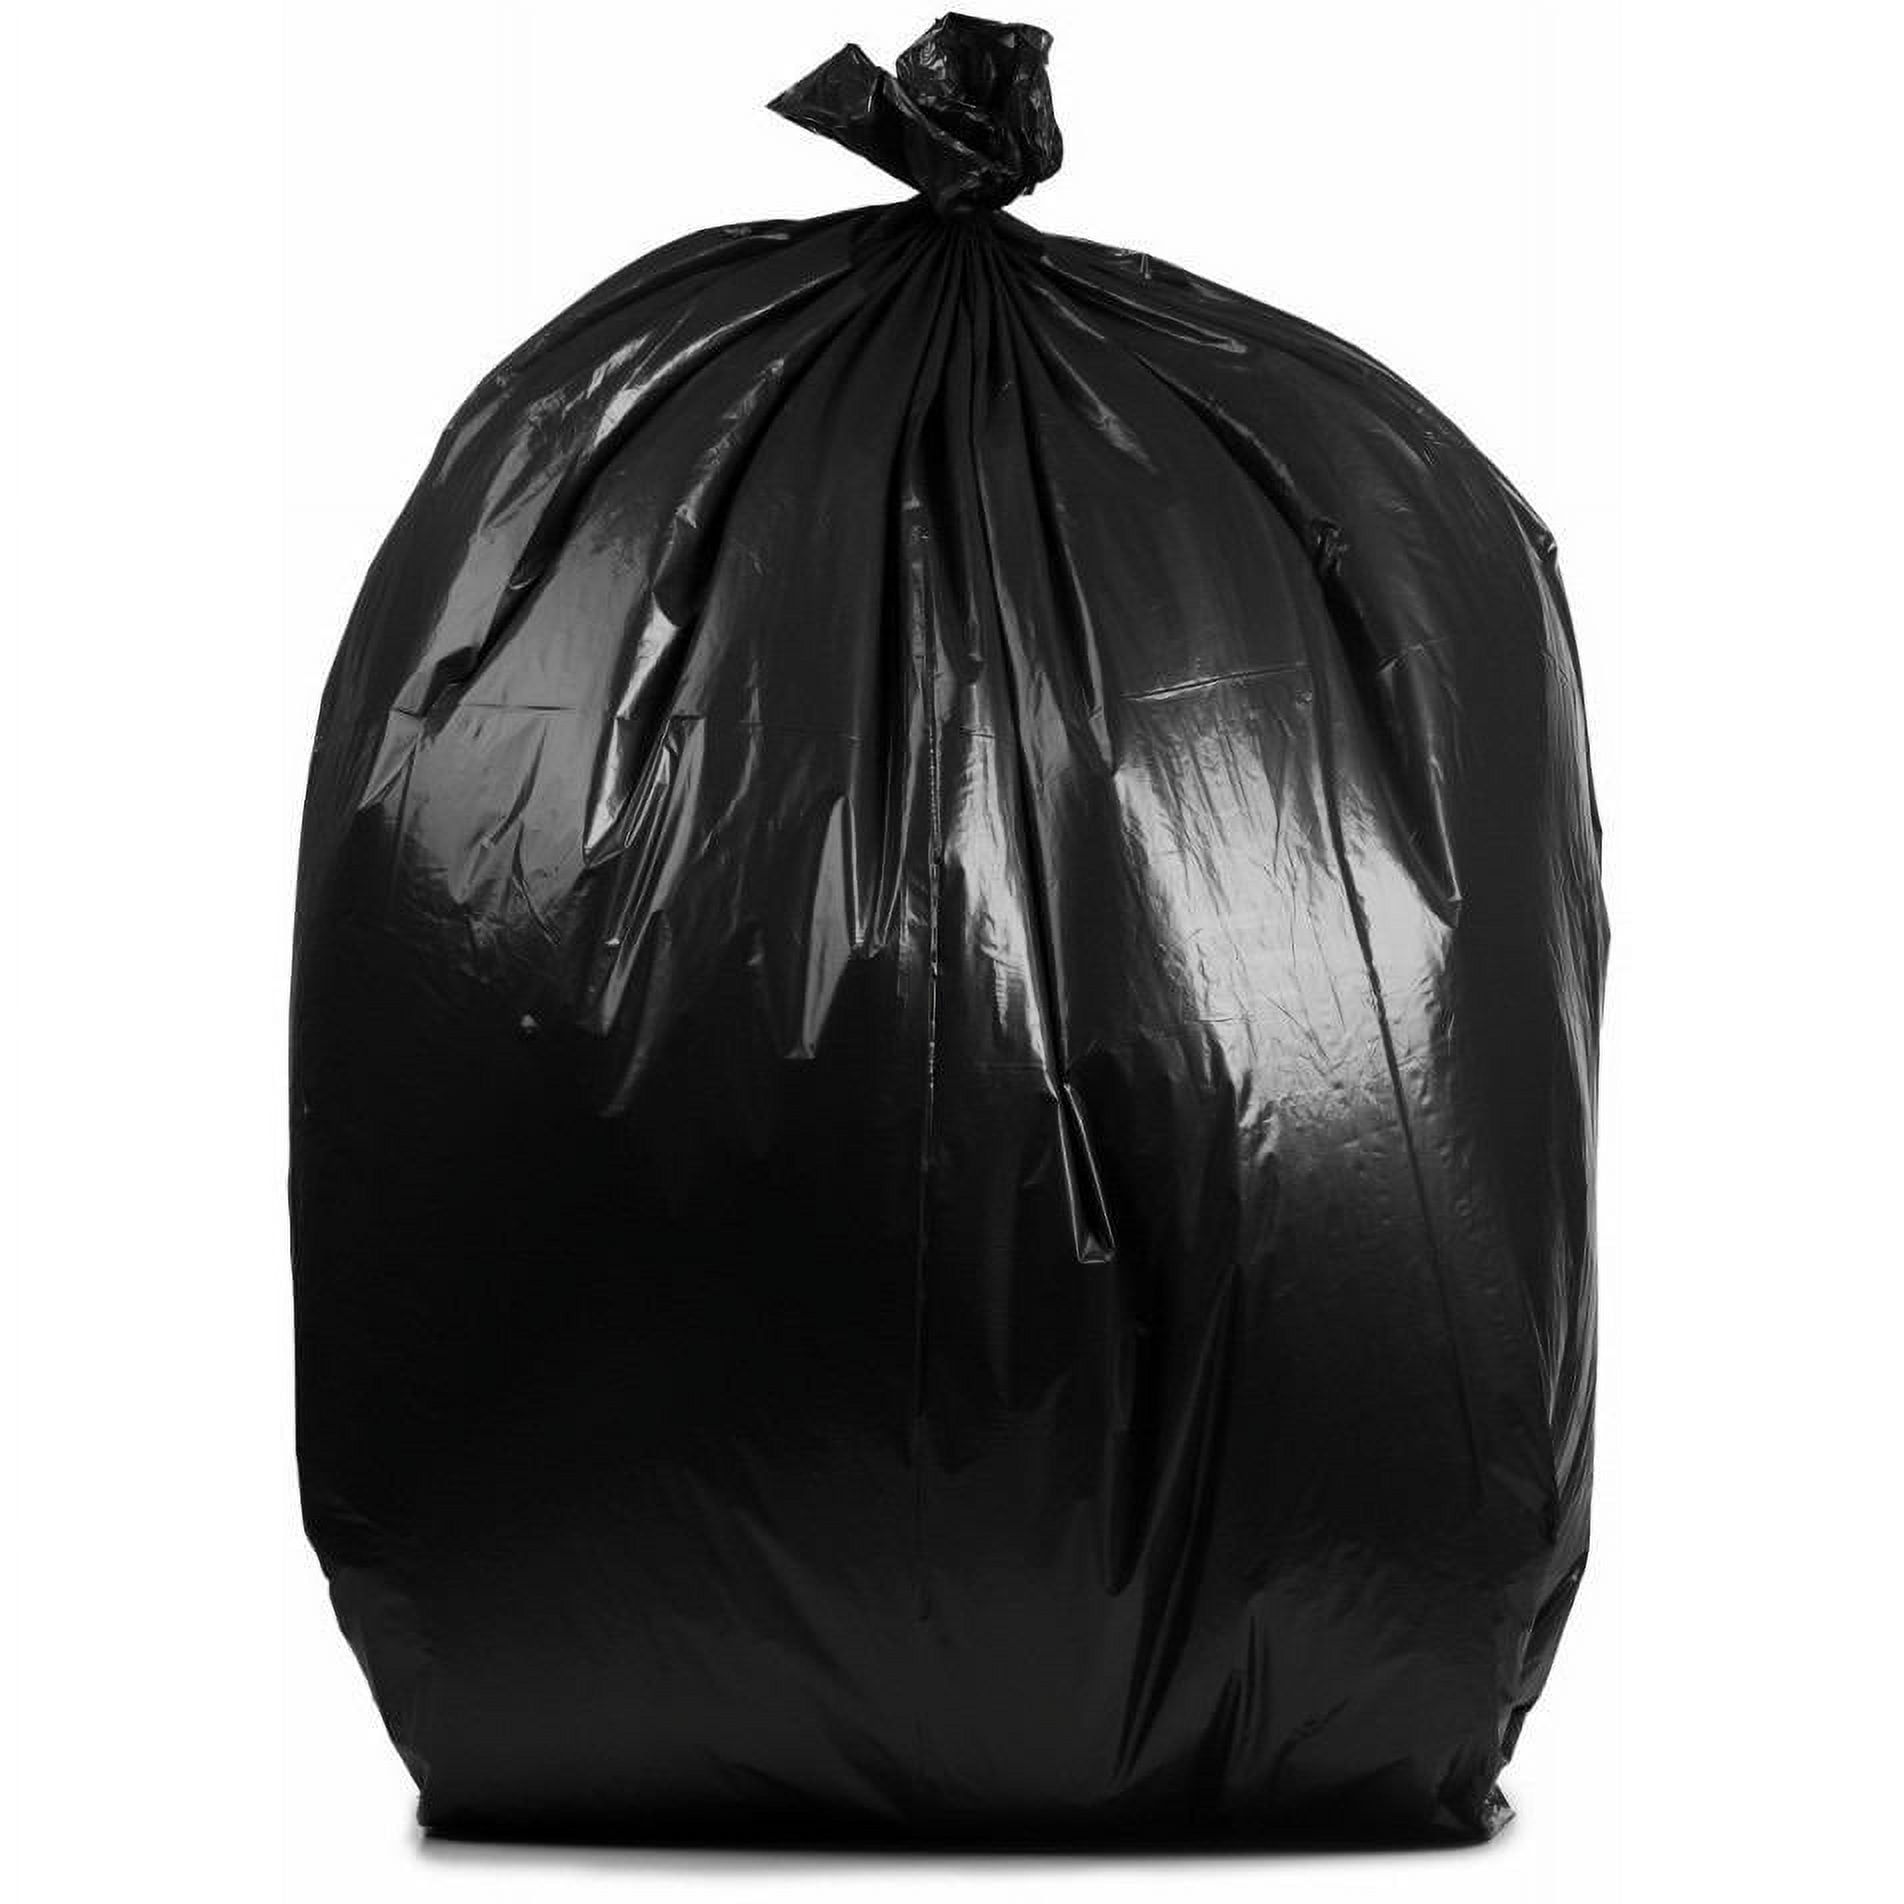 12 Gal.-16 Gal. Clear Garbage Bags - 22 in. x 31 in. (Pack of 500) 1 mil  (eq) - for Recycling, Storage & Outdoor Use